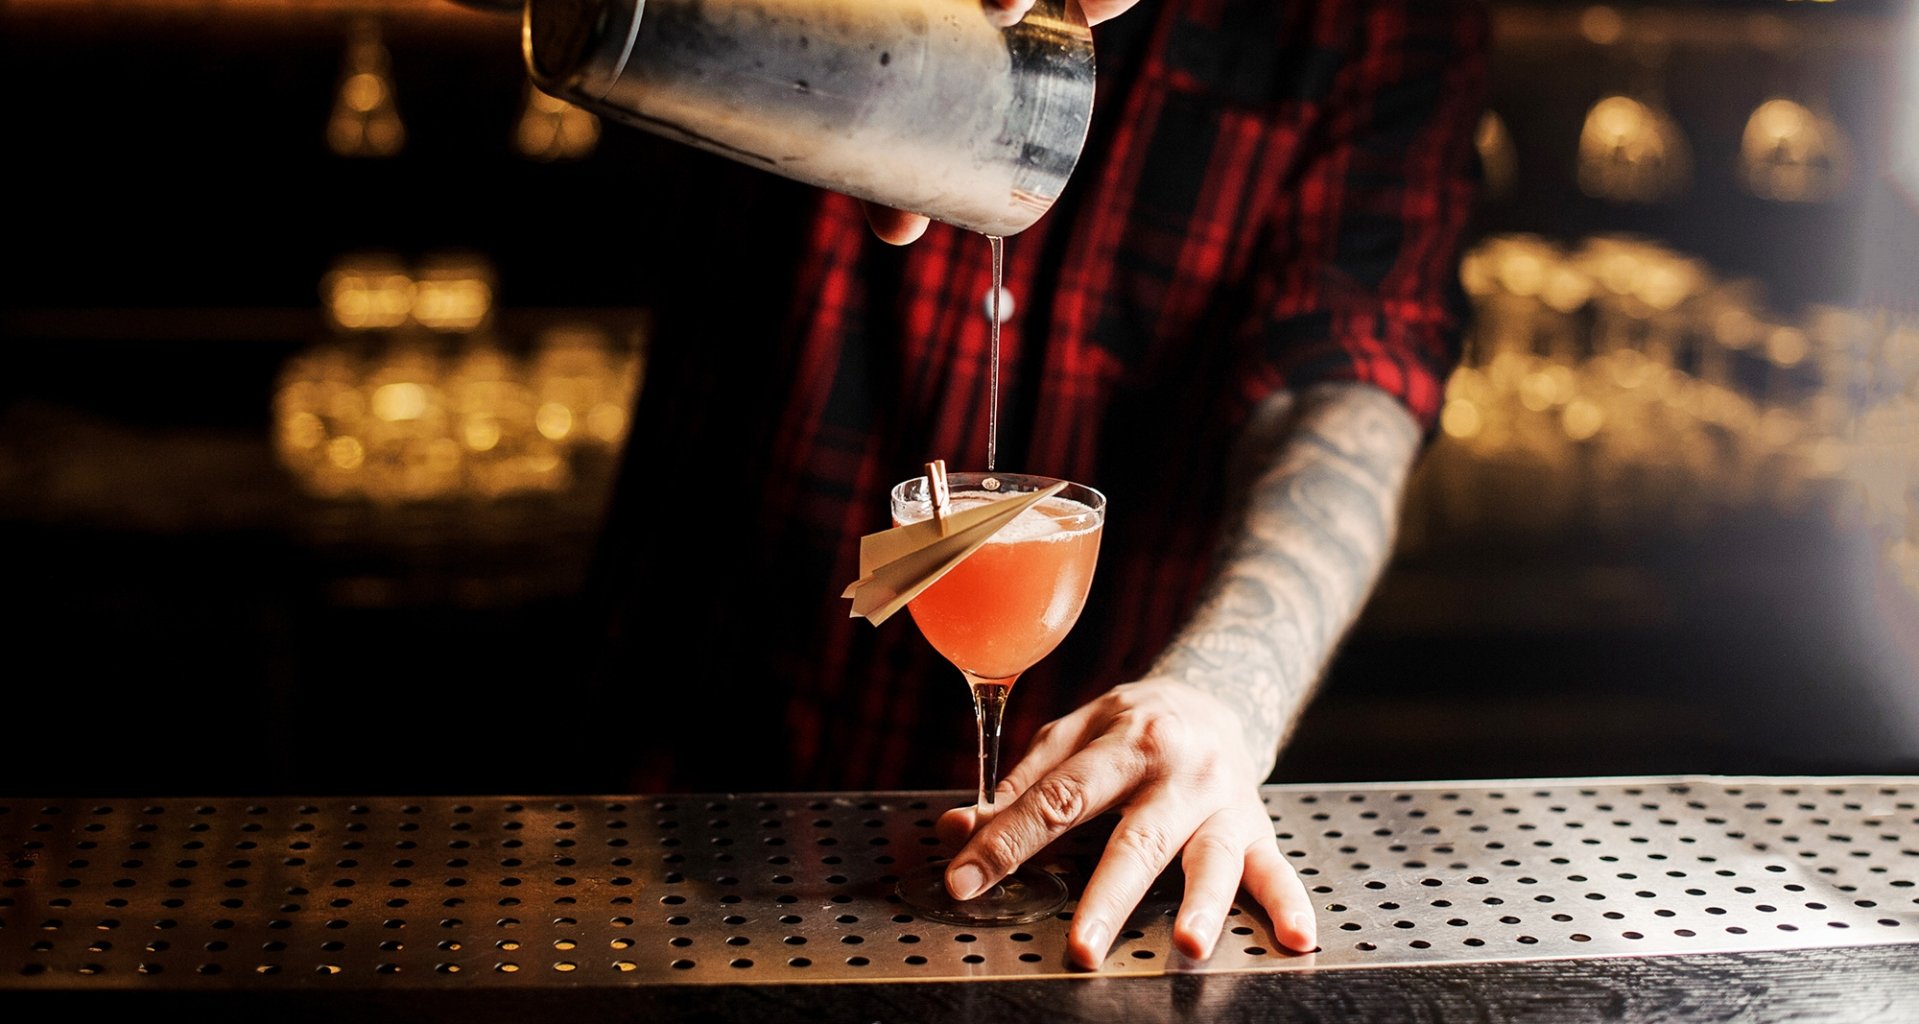 A bartending puts the finishing touches on a cocktail